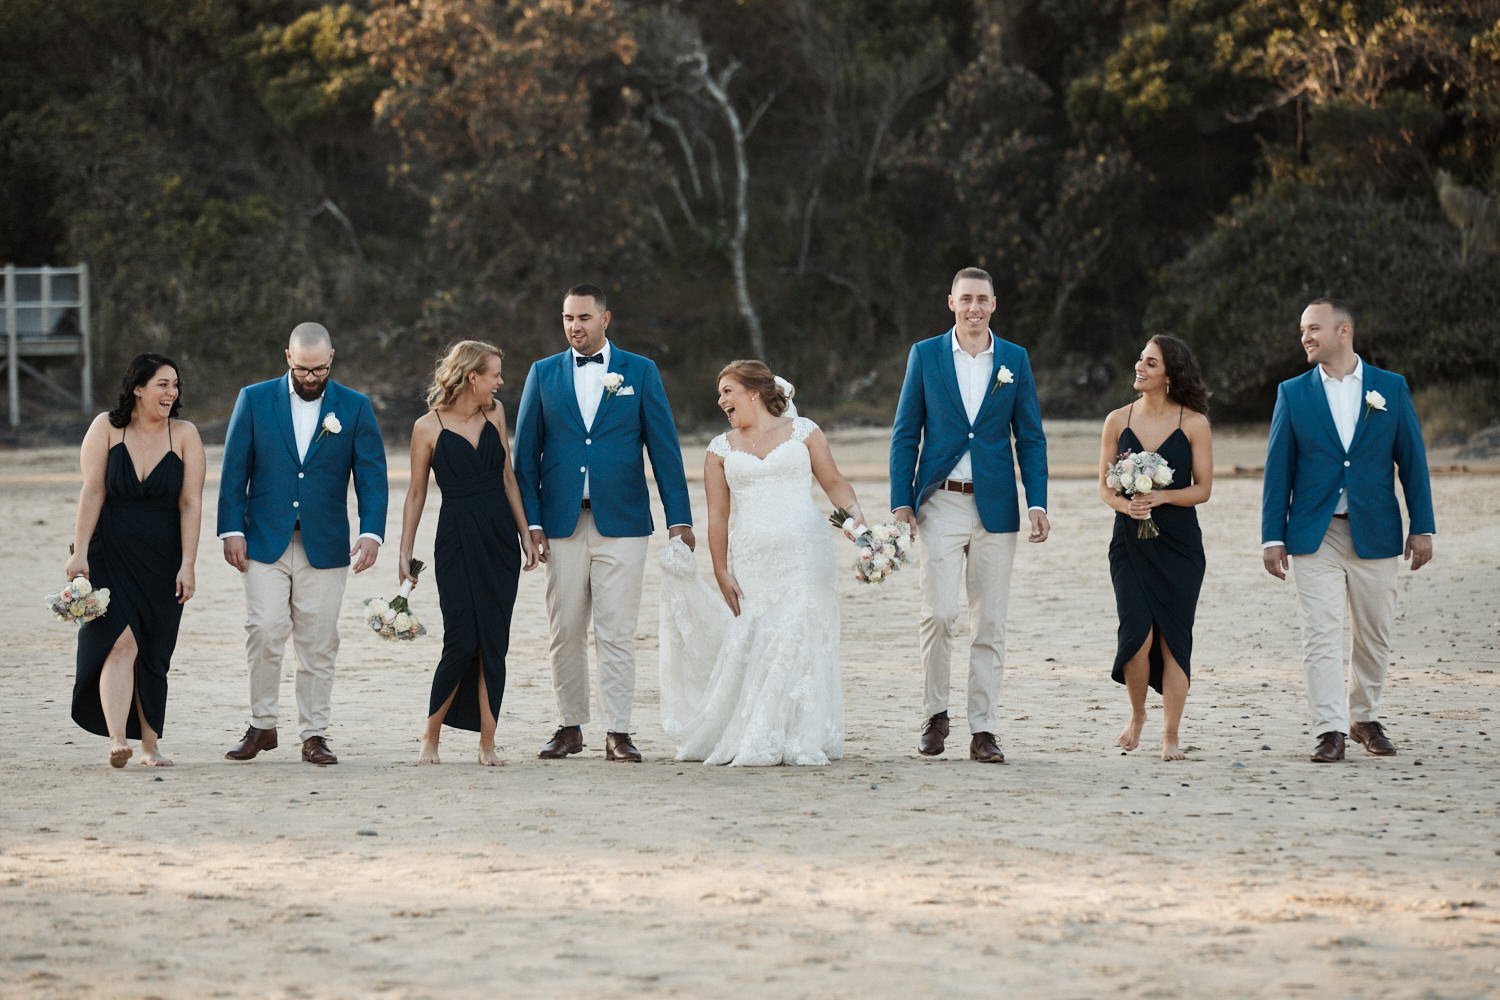 Tweed Heads Wedding Photography - Natural &amp; Candid Images - Paul Skinner Weddings